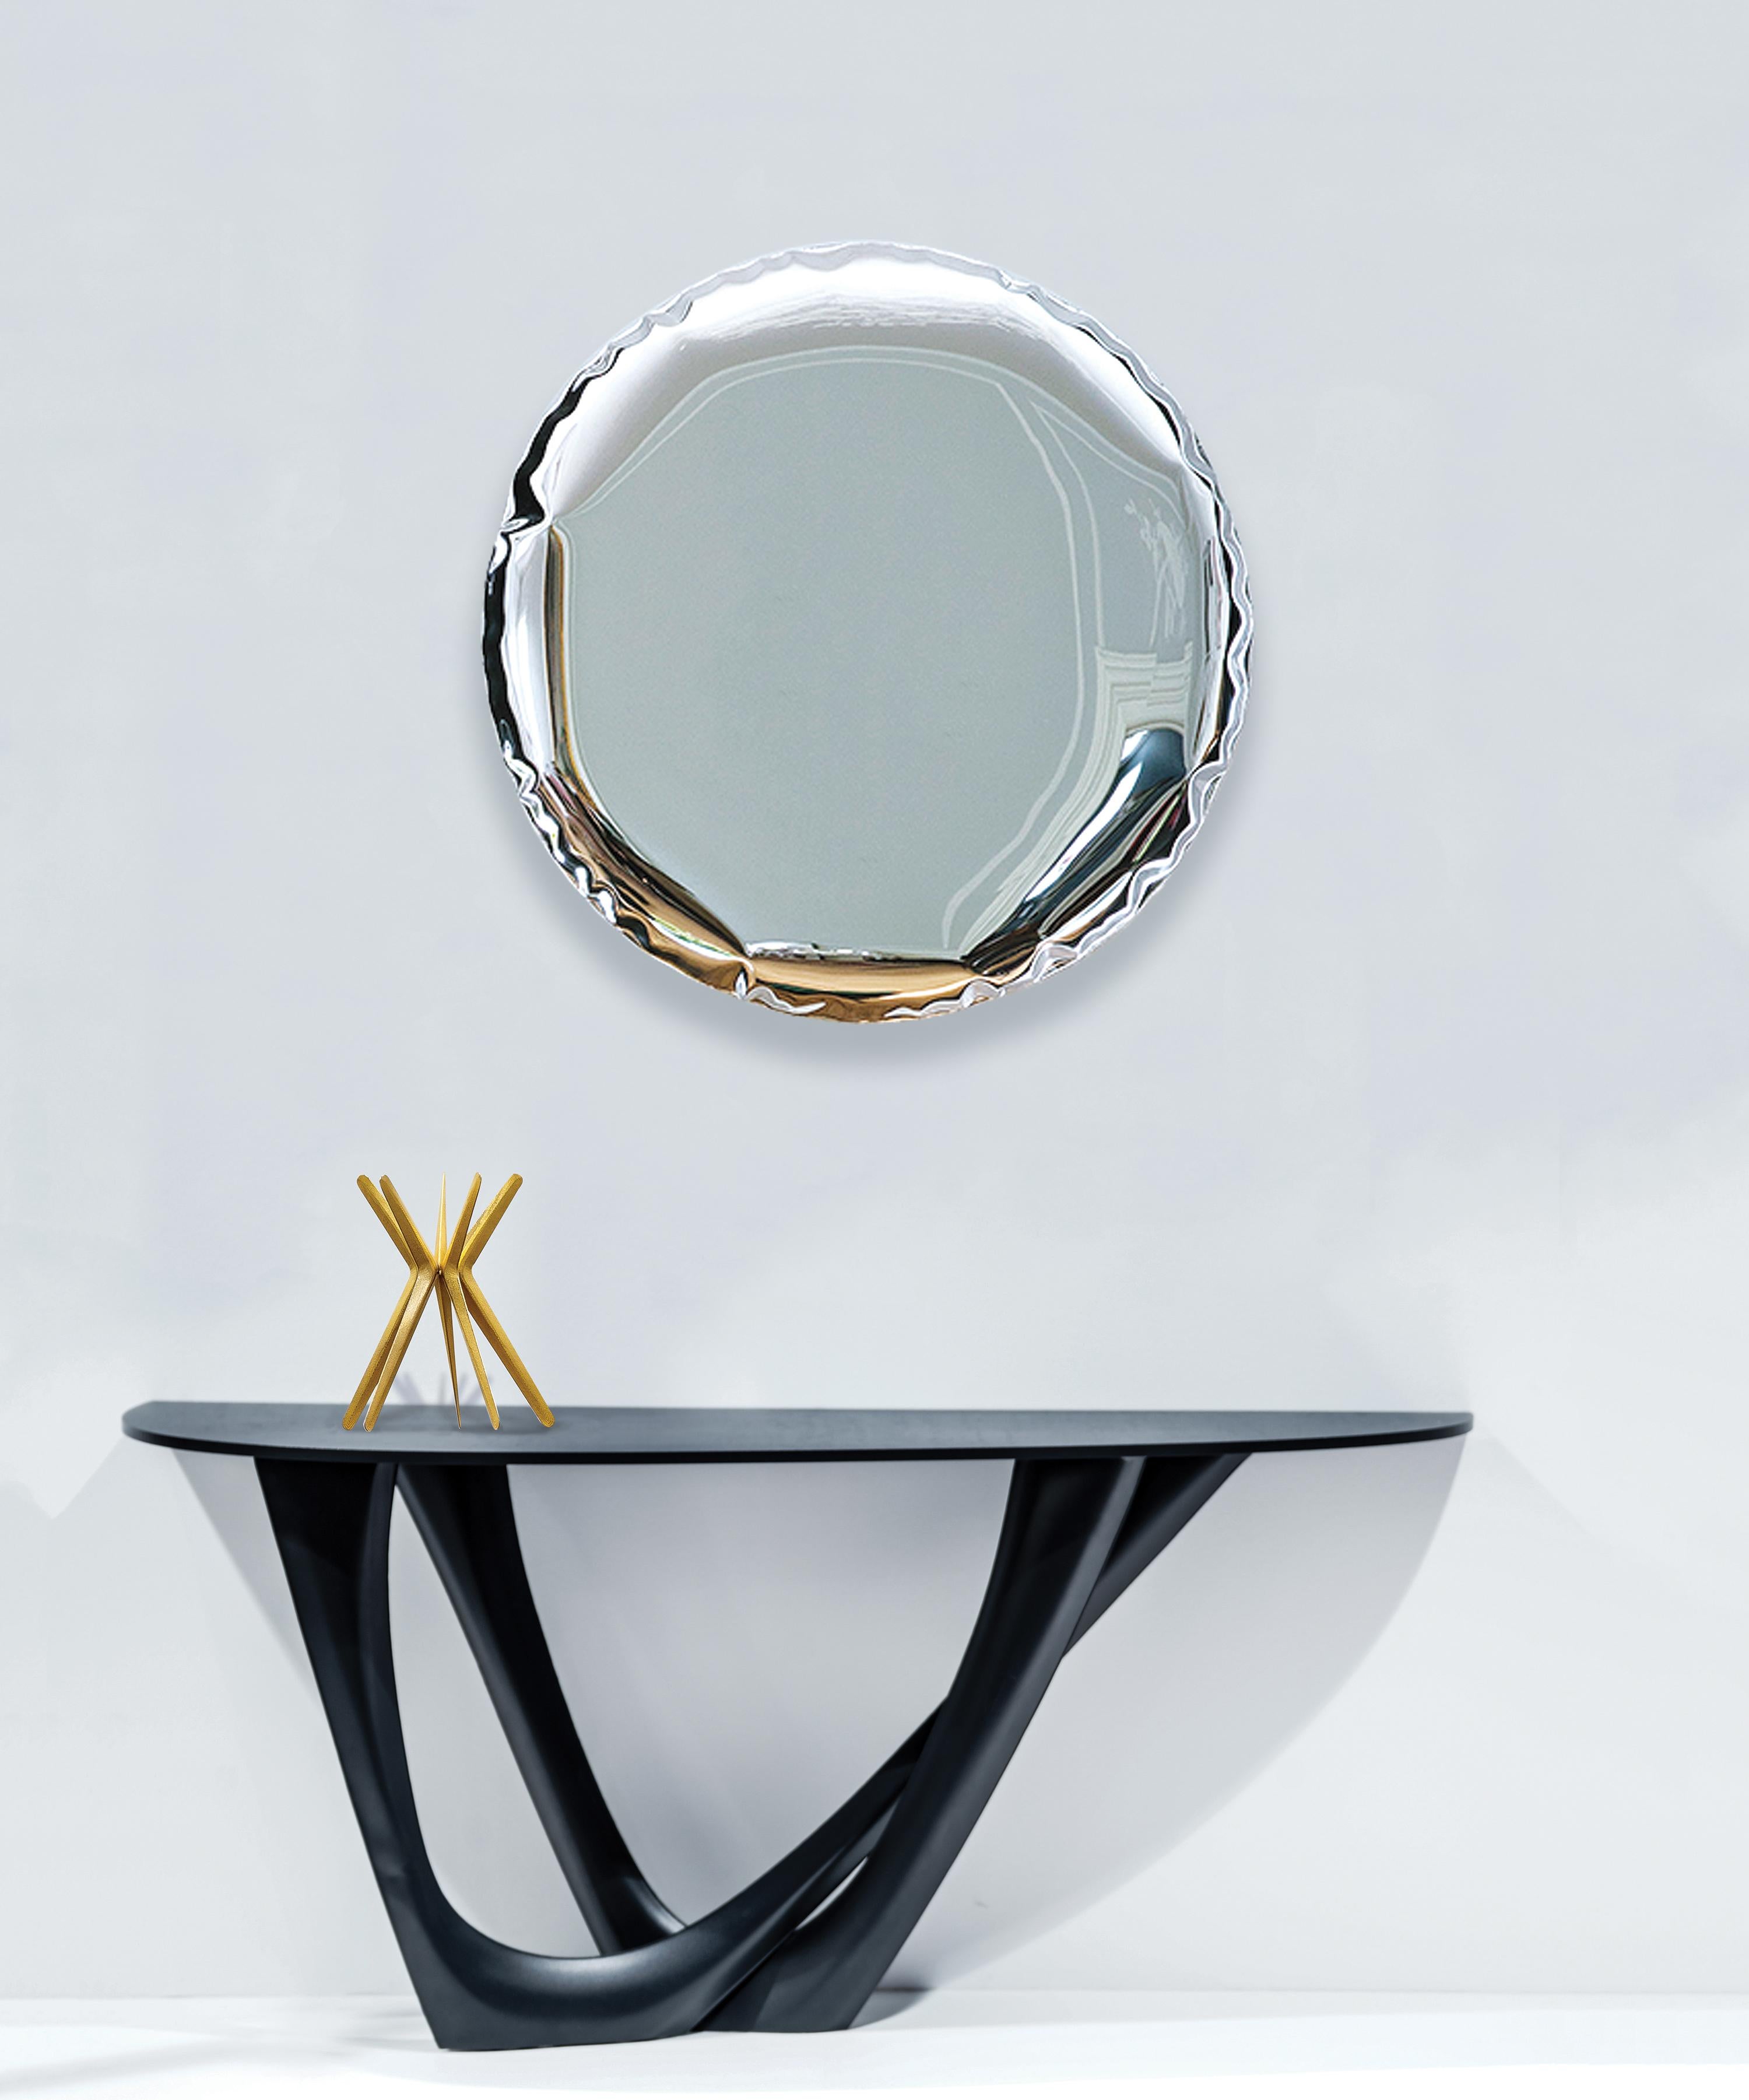 Helix Nebula Topaz Rhodonite Oko 120 Sculptural Wall Mirror by Zieta
Dimensions: ø 120 x D 6 cm. 
Material: Stainless steel. 
Finish: Helix Nebula Topaz Rhodonite transition. 

Available in different finishes. Also available in different sizes: ø75,